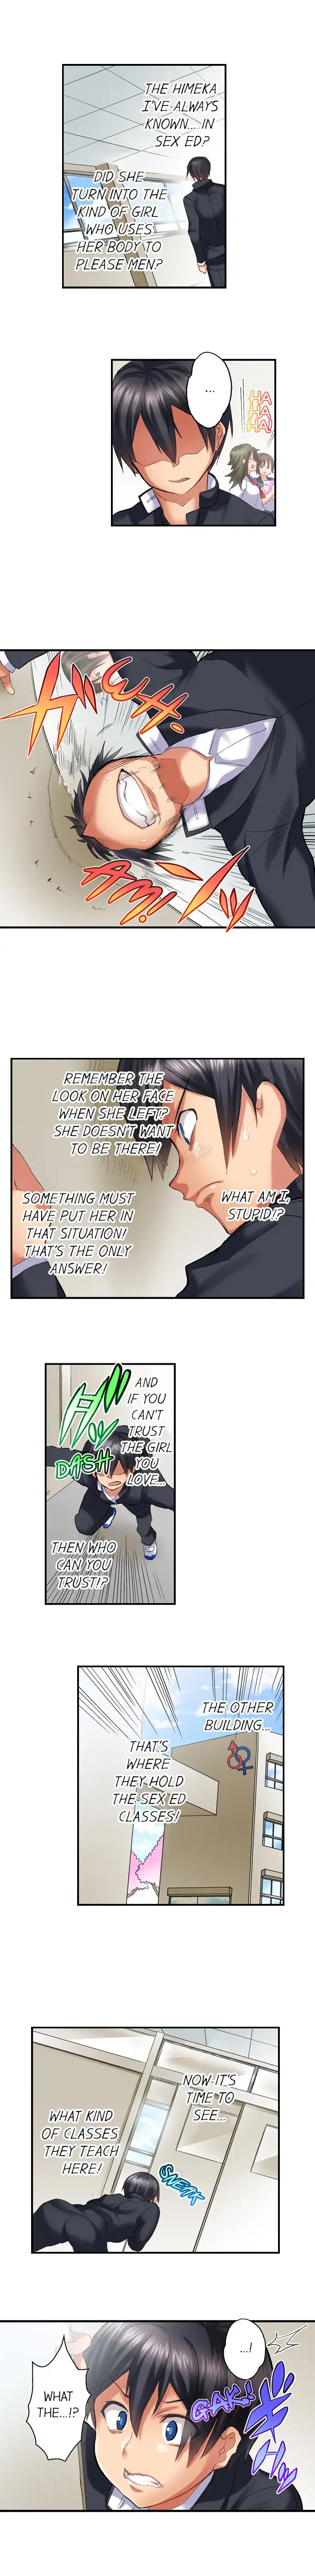 Welcome To Open Sex Class ~Class 1-H’s Sex Workshop~ - Chapter 1 Page 9